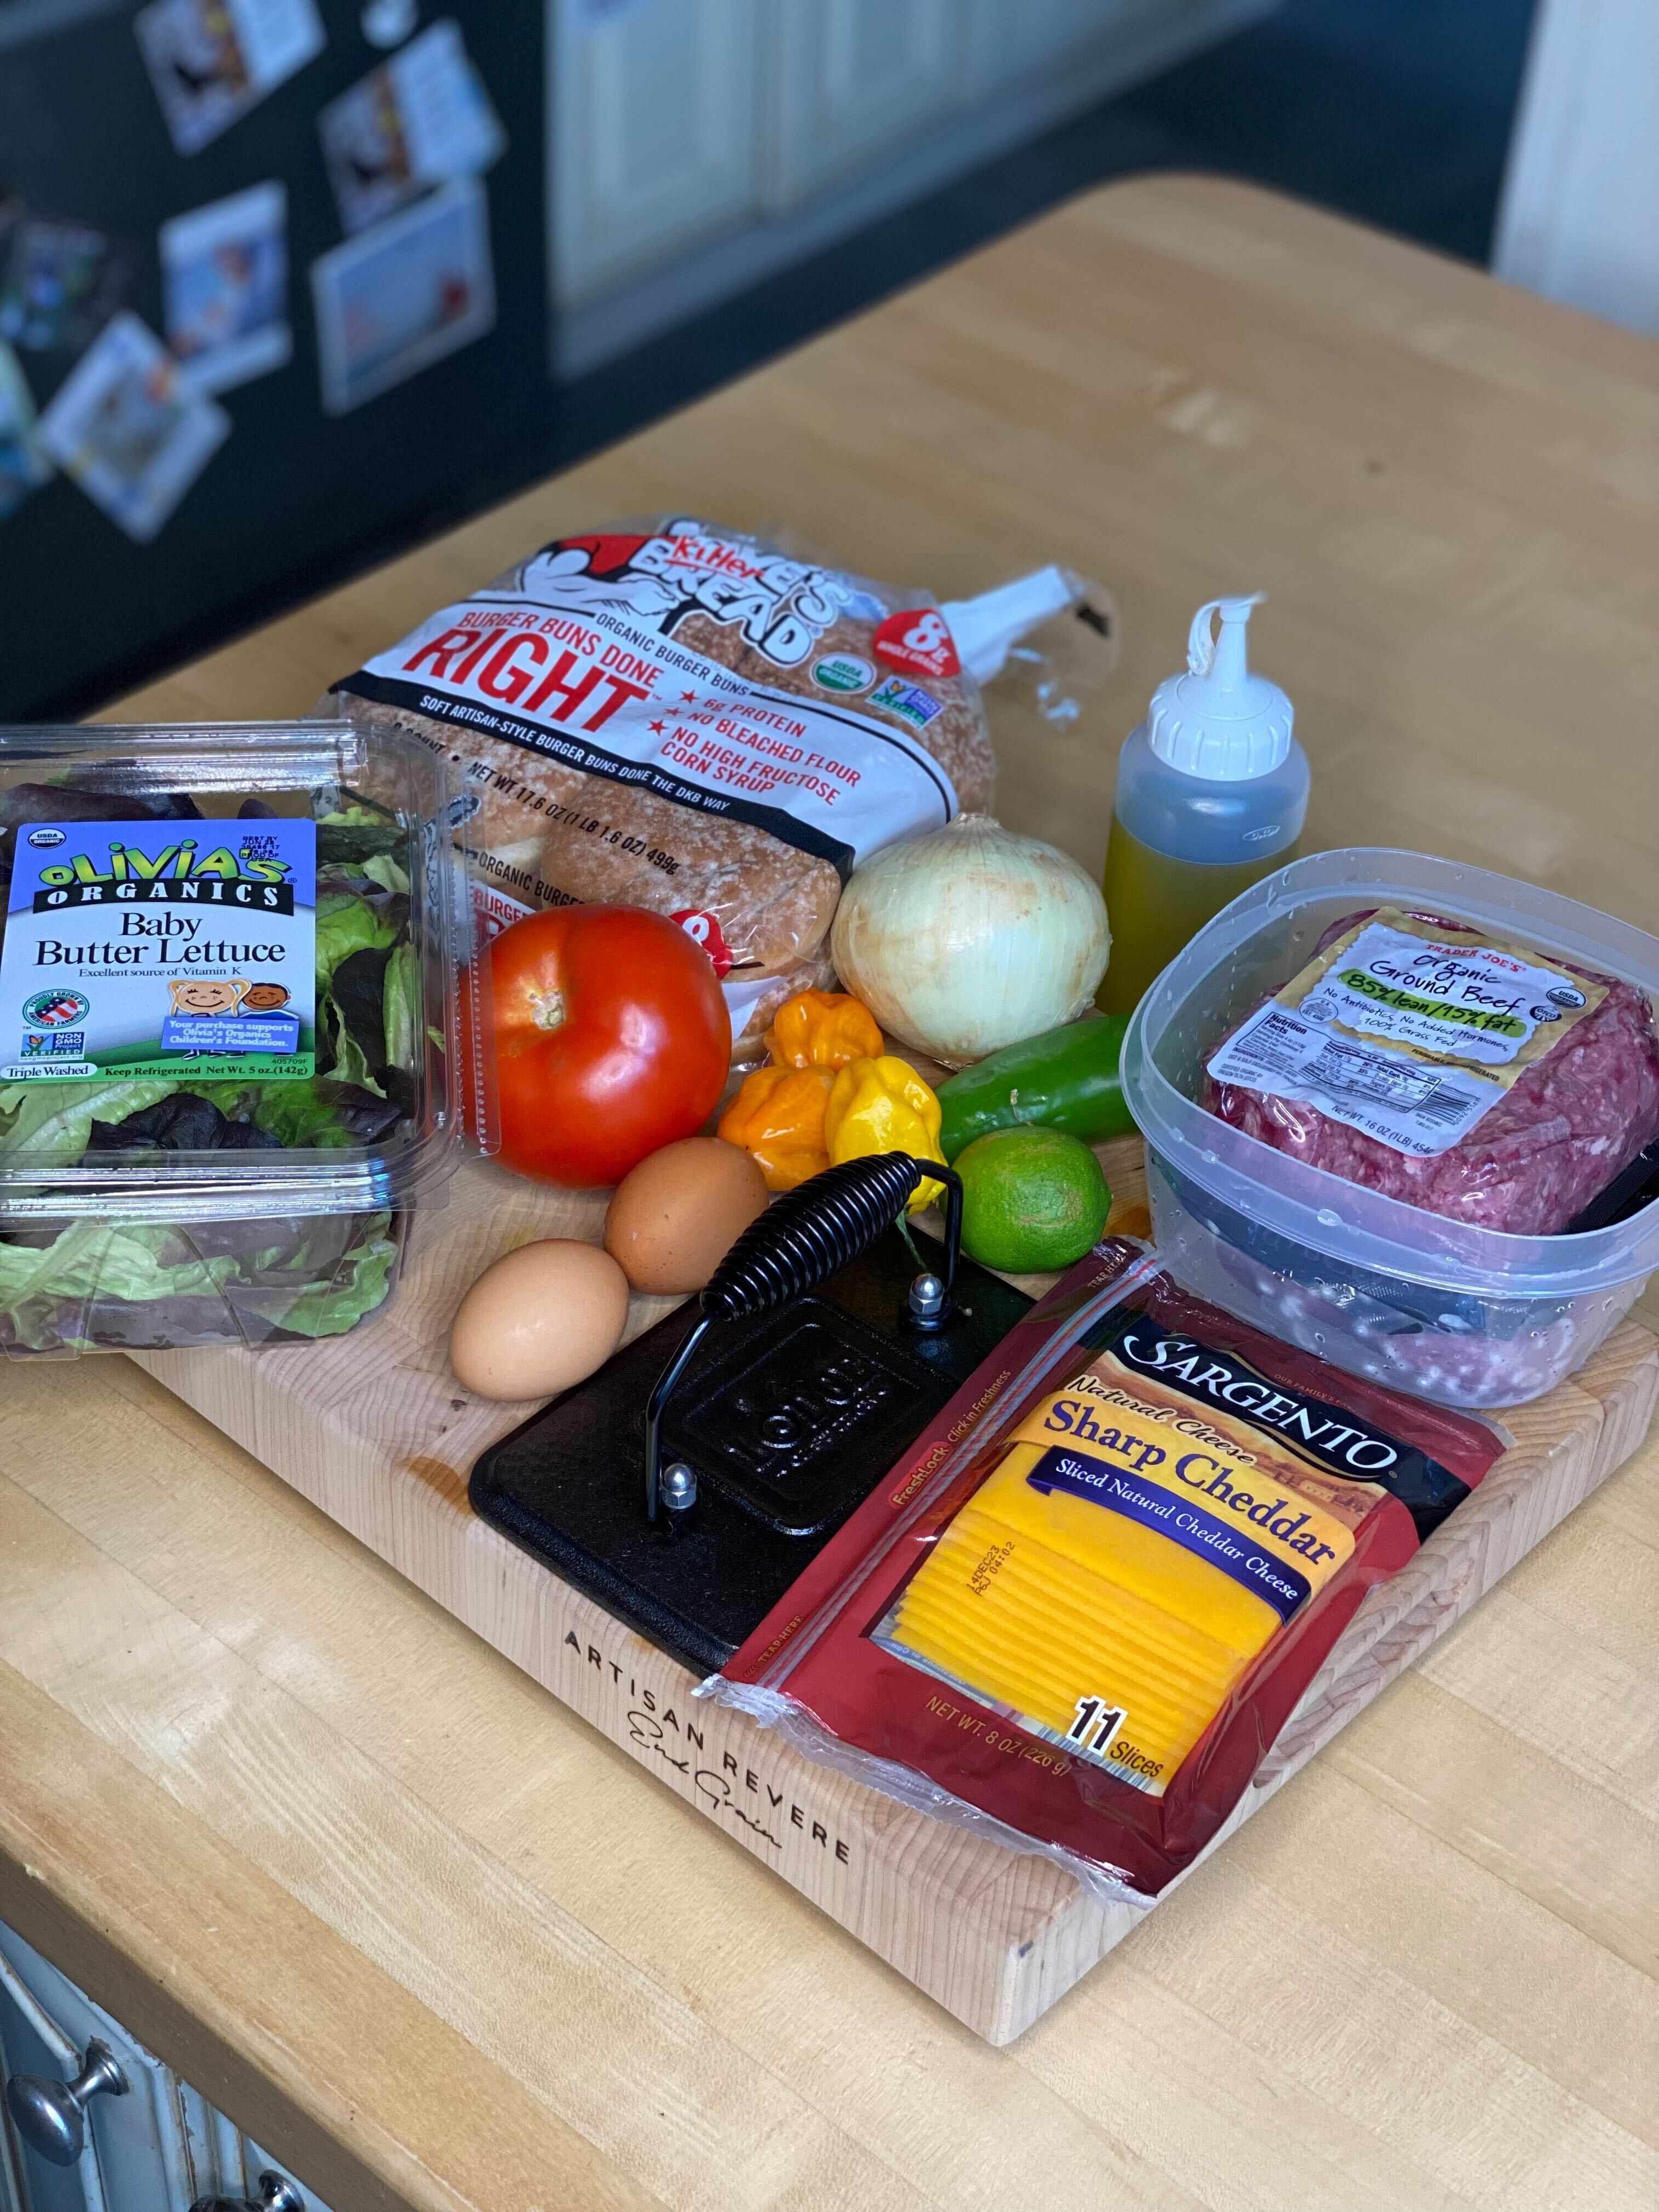 Ingredients for smash cheeseburgers: buns, evoo, burger meat, cheddar, eggs, lime, jalapeno, chipotles, onion, lettuce, eggs